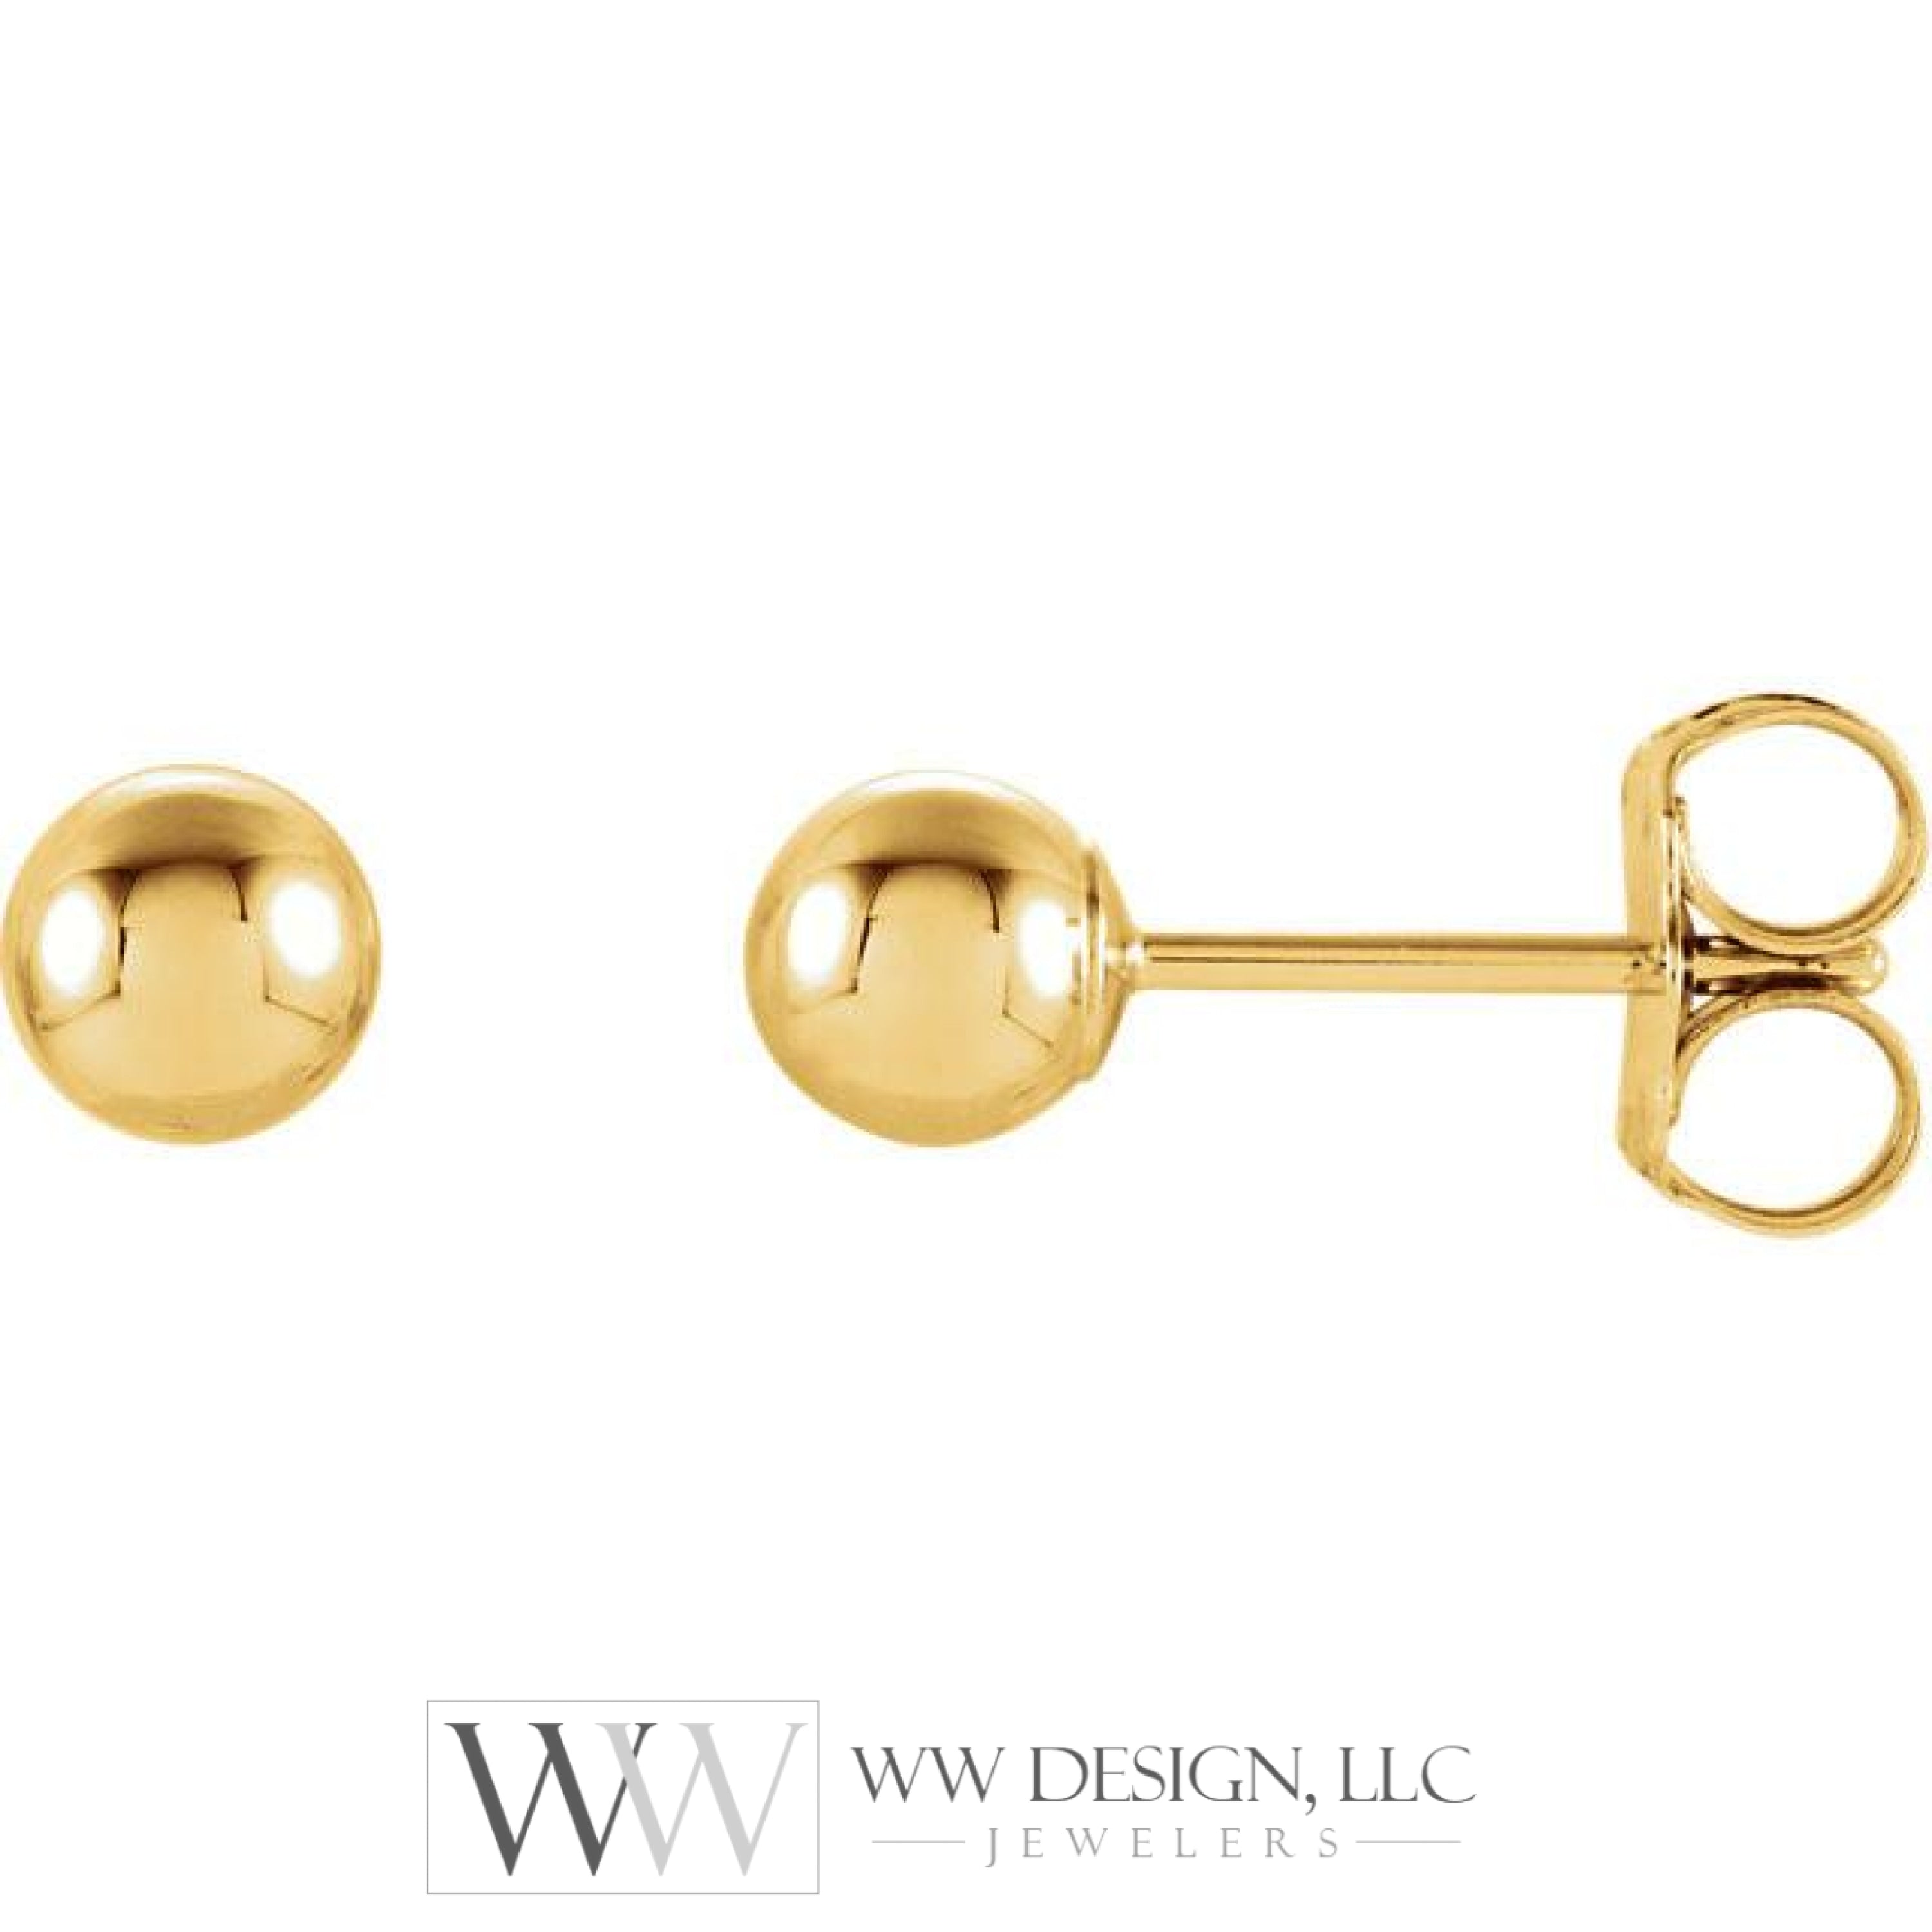 4mm Ball Earrings with Bright Finish - 14K Gold (Yellow or White)